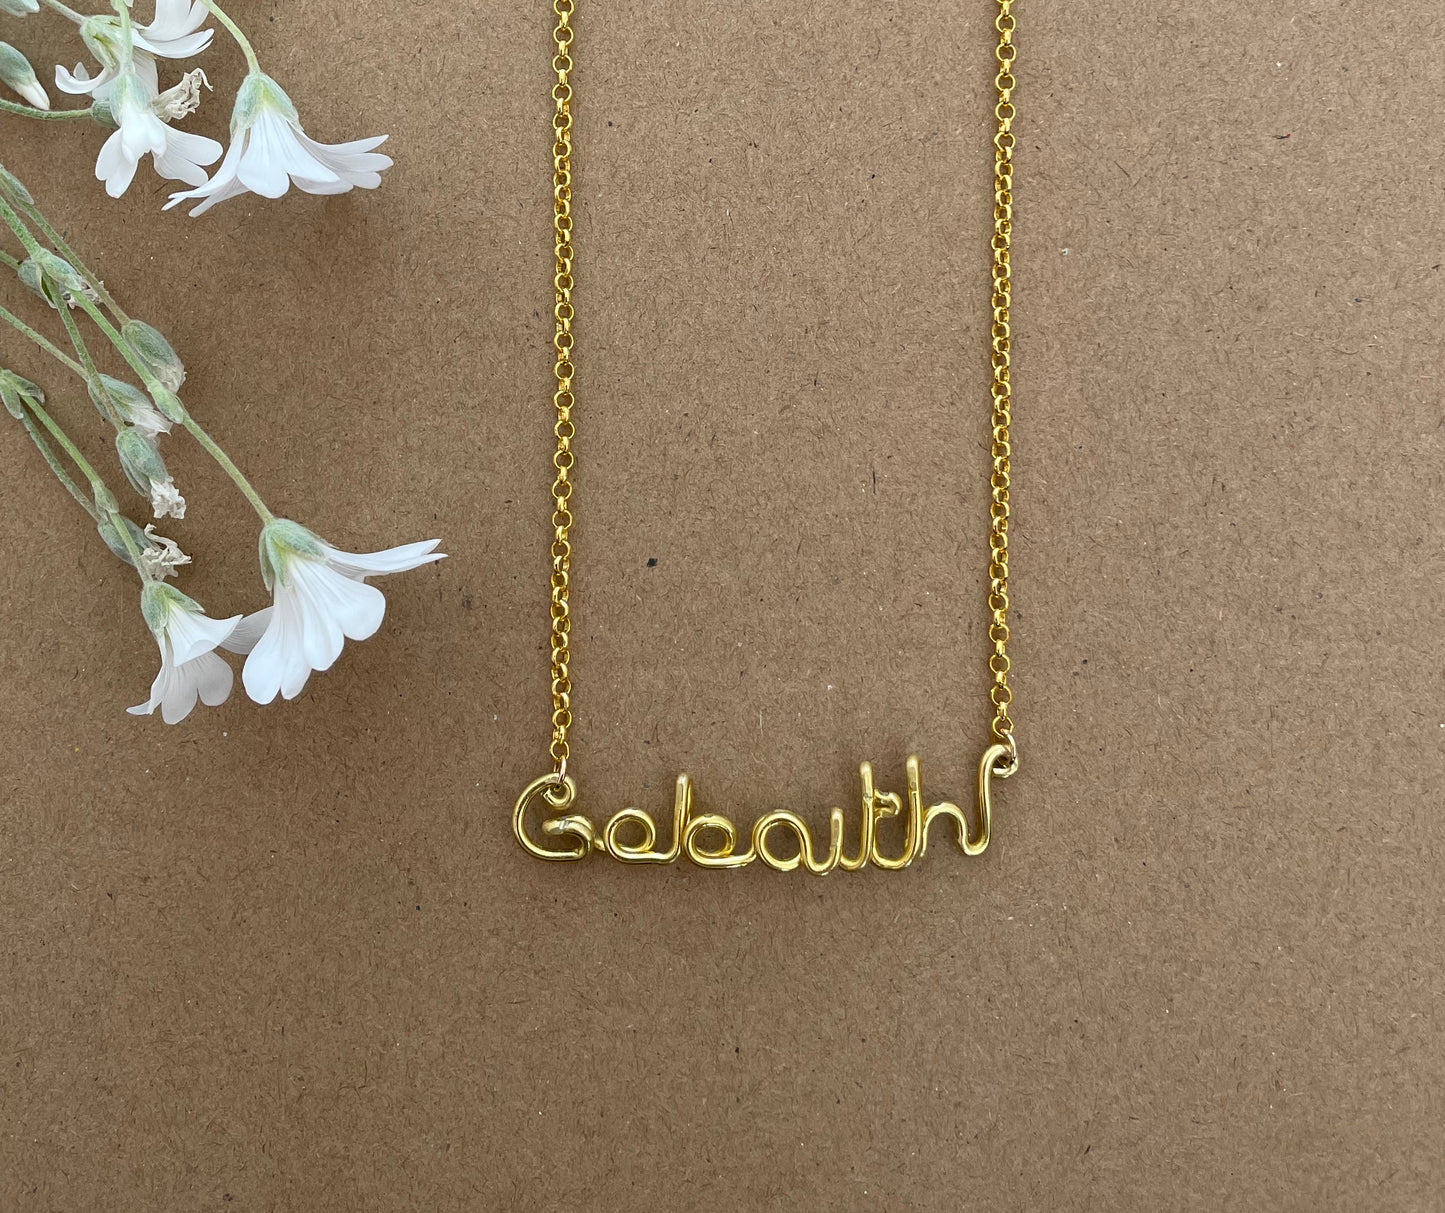 Gobaith (Hope) Welsh language wire necklace